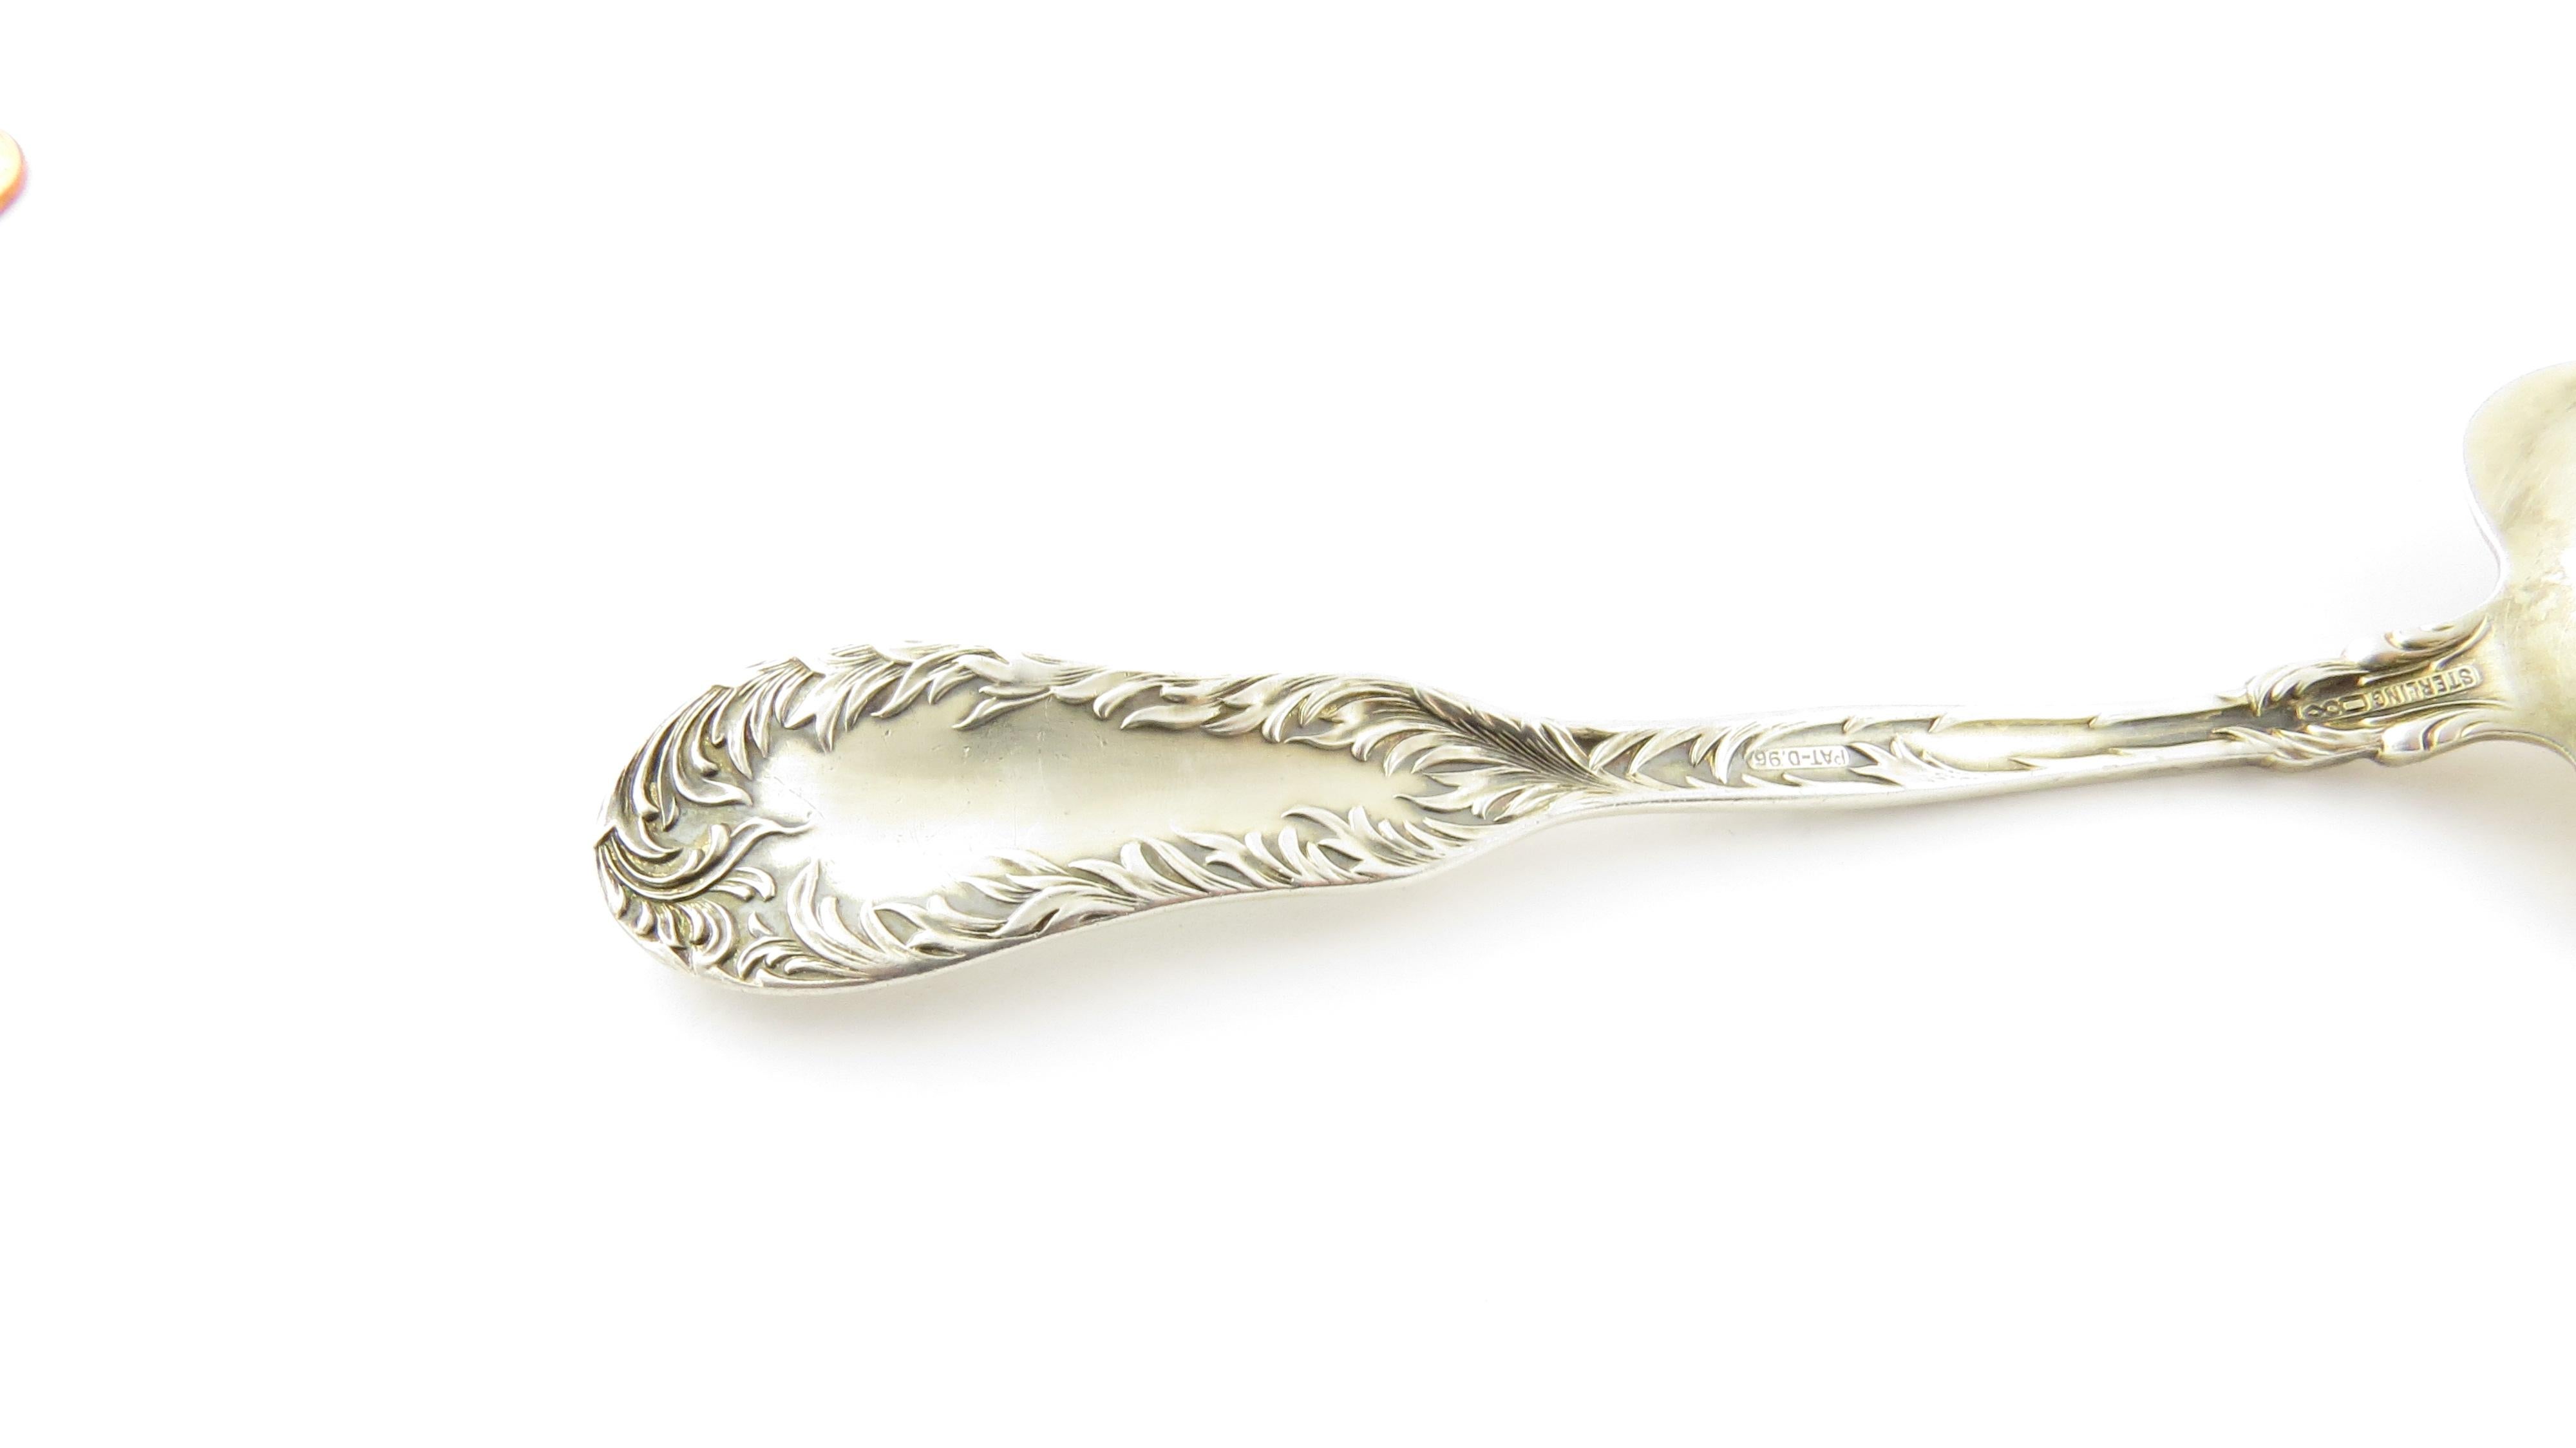 Dominick & Haff No.10 Sterling Silver Enameled Gilt Small Berry Spoon For Sale 1